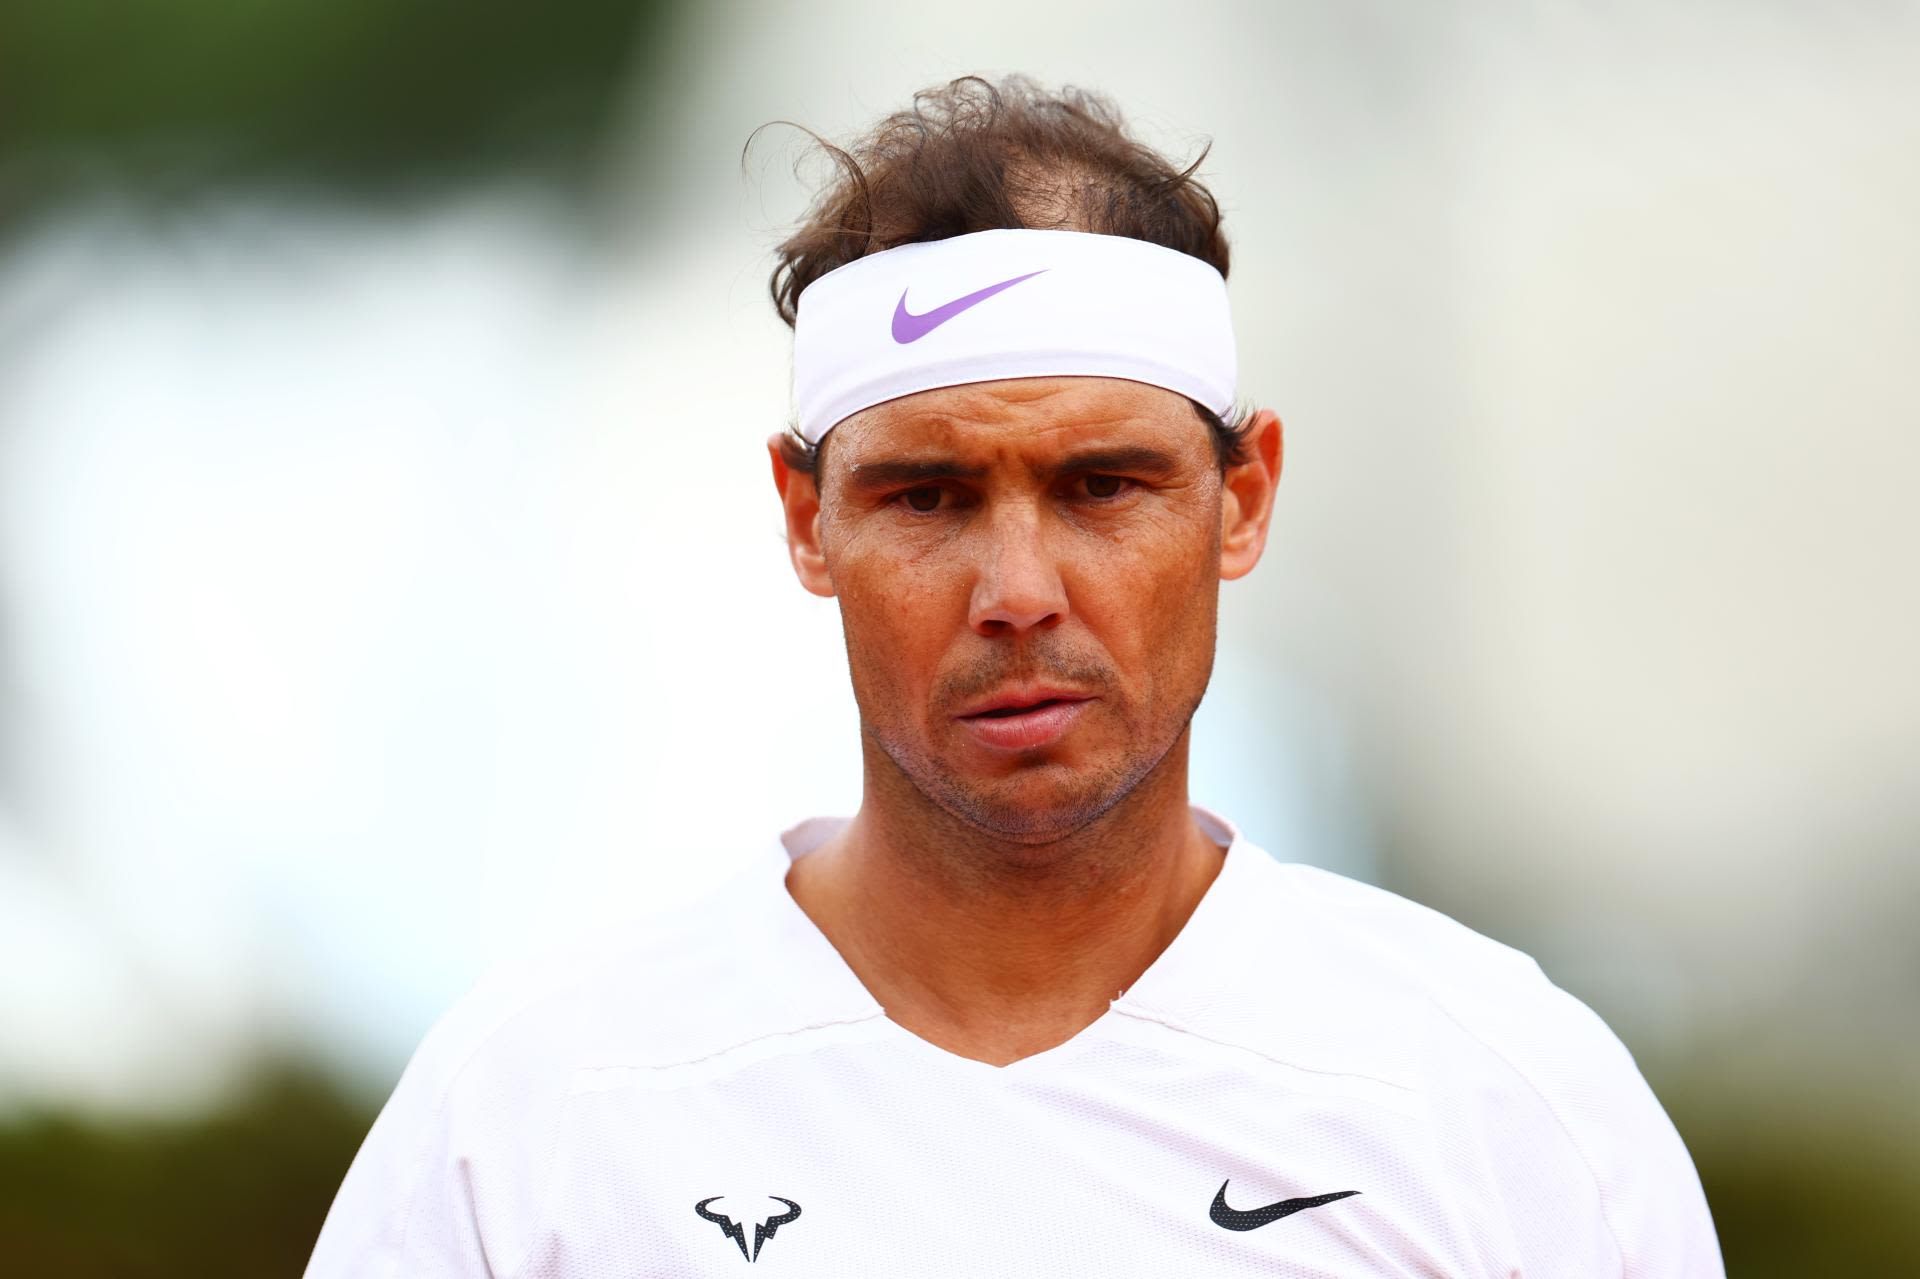 Rafael Nadal reveals his deep regret for Sinner's absence from Rome